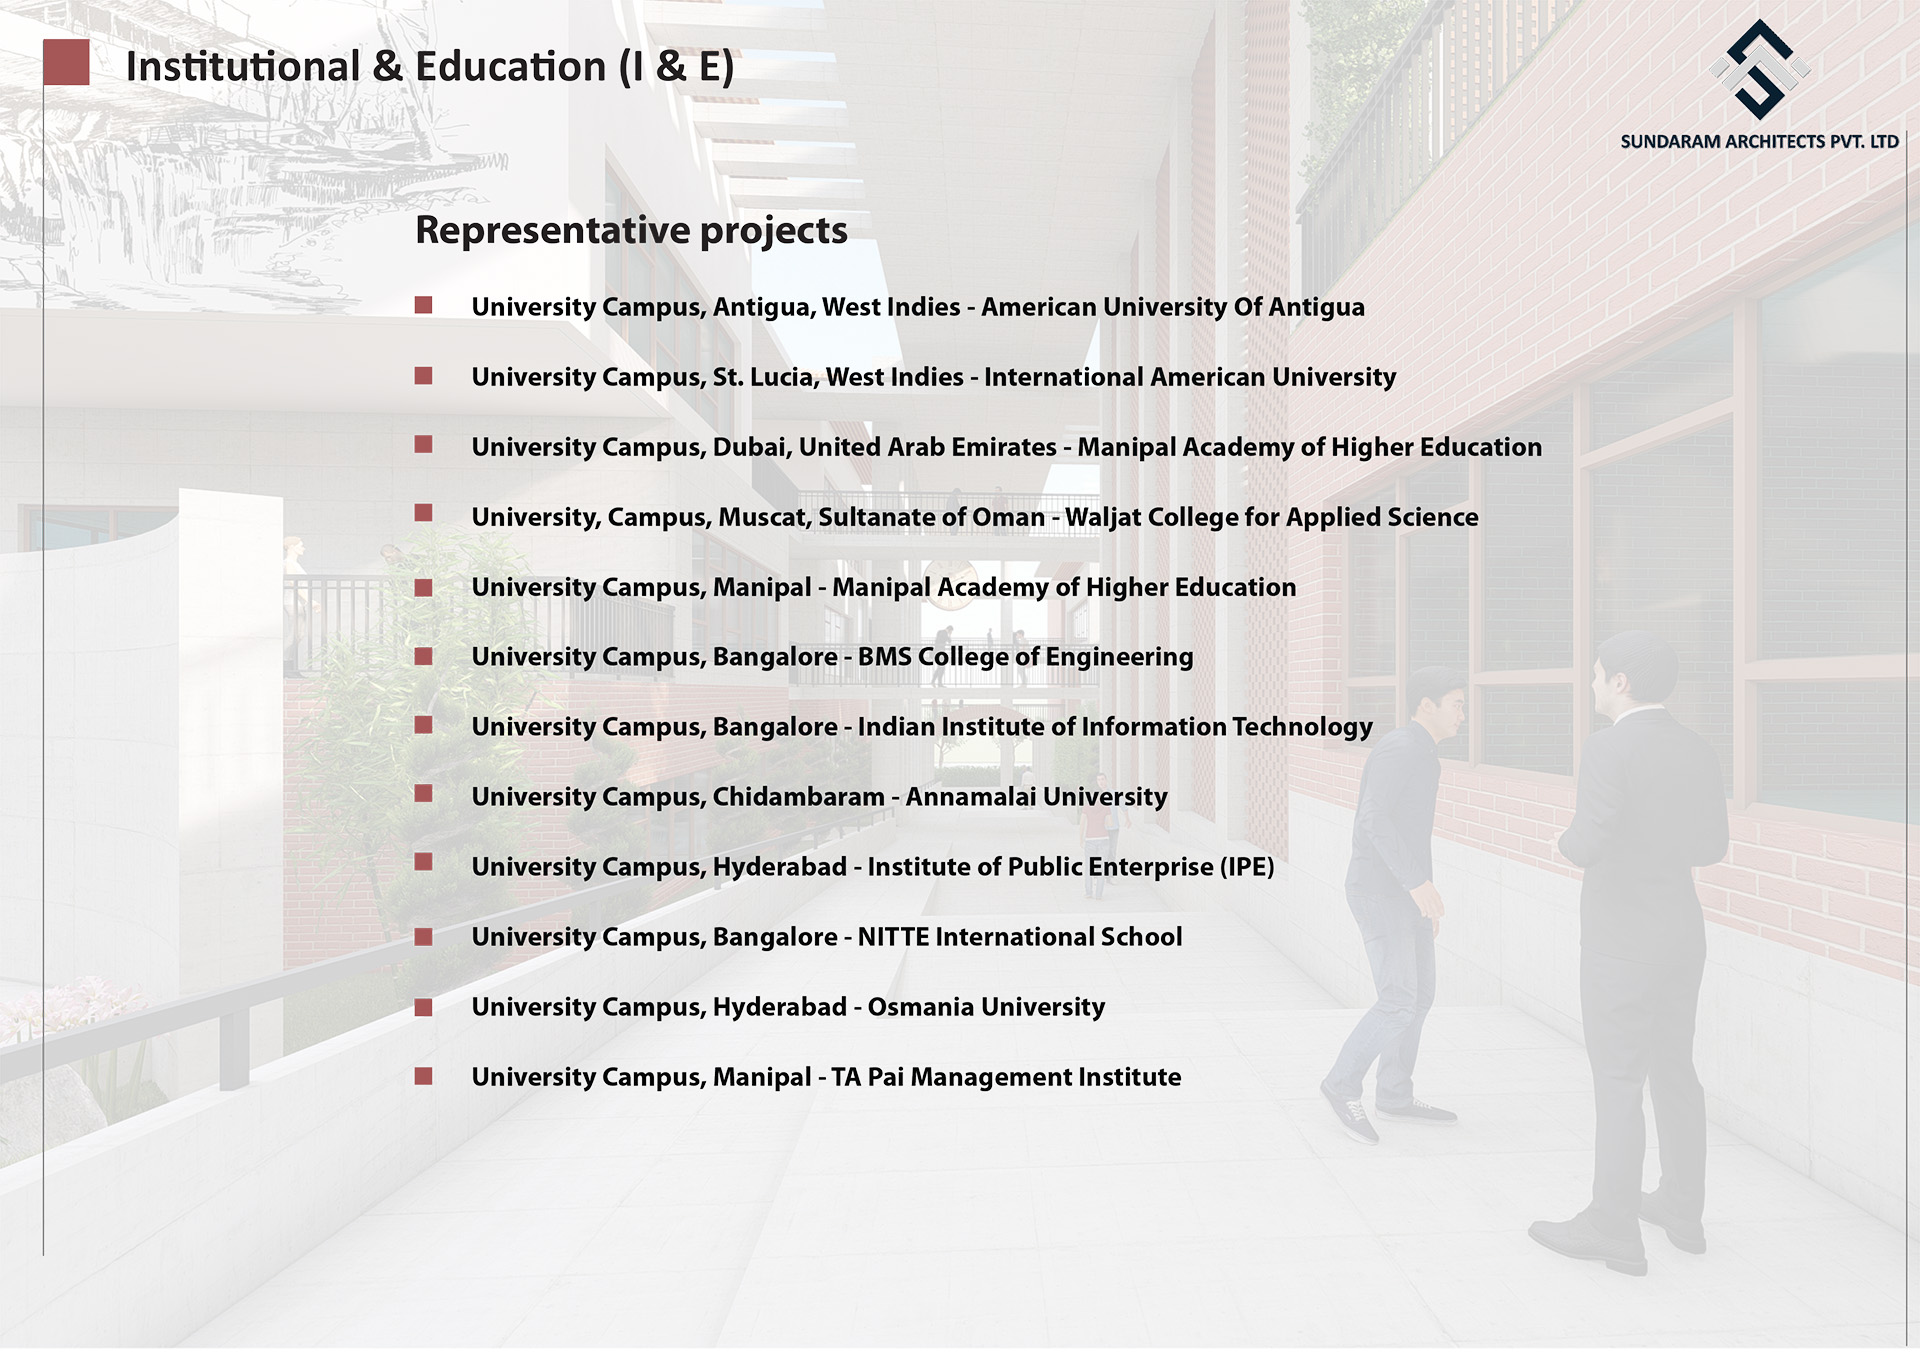 Institutional & Education Projects, which is well designed by Sundaram Architects